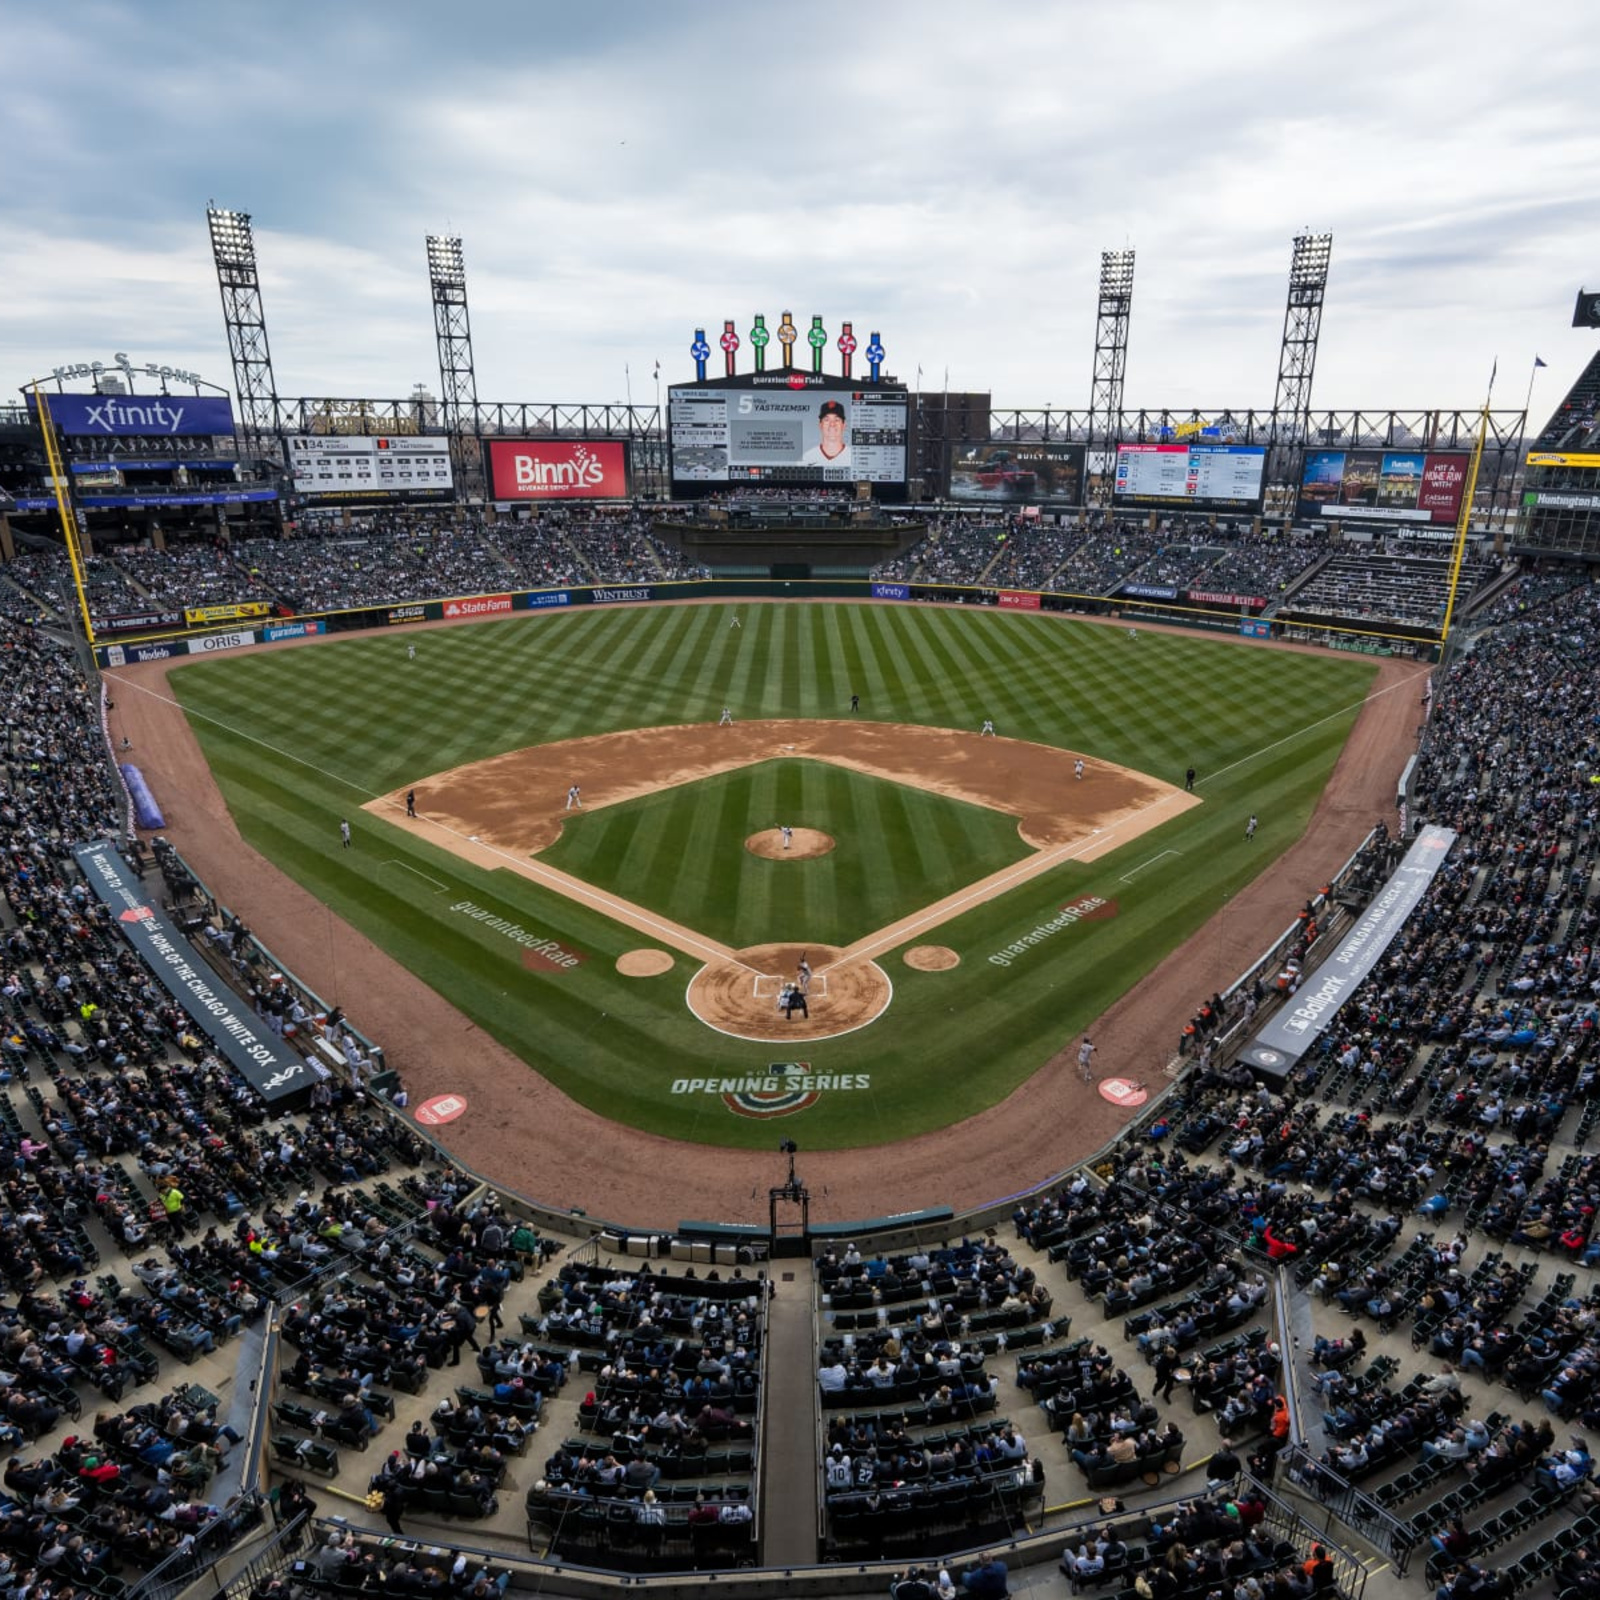 35th Street 'Unlikely' To Close For Sox Games After Driver